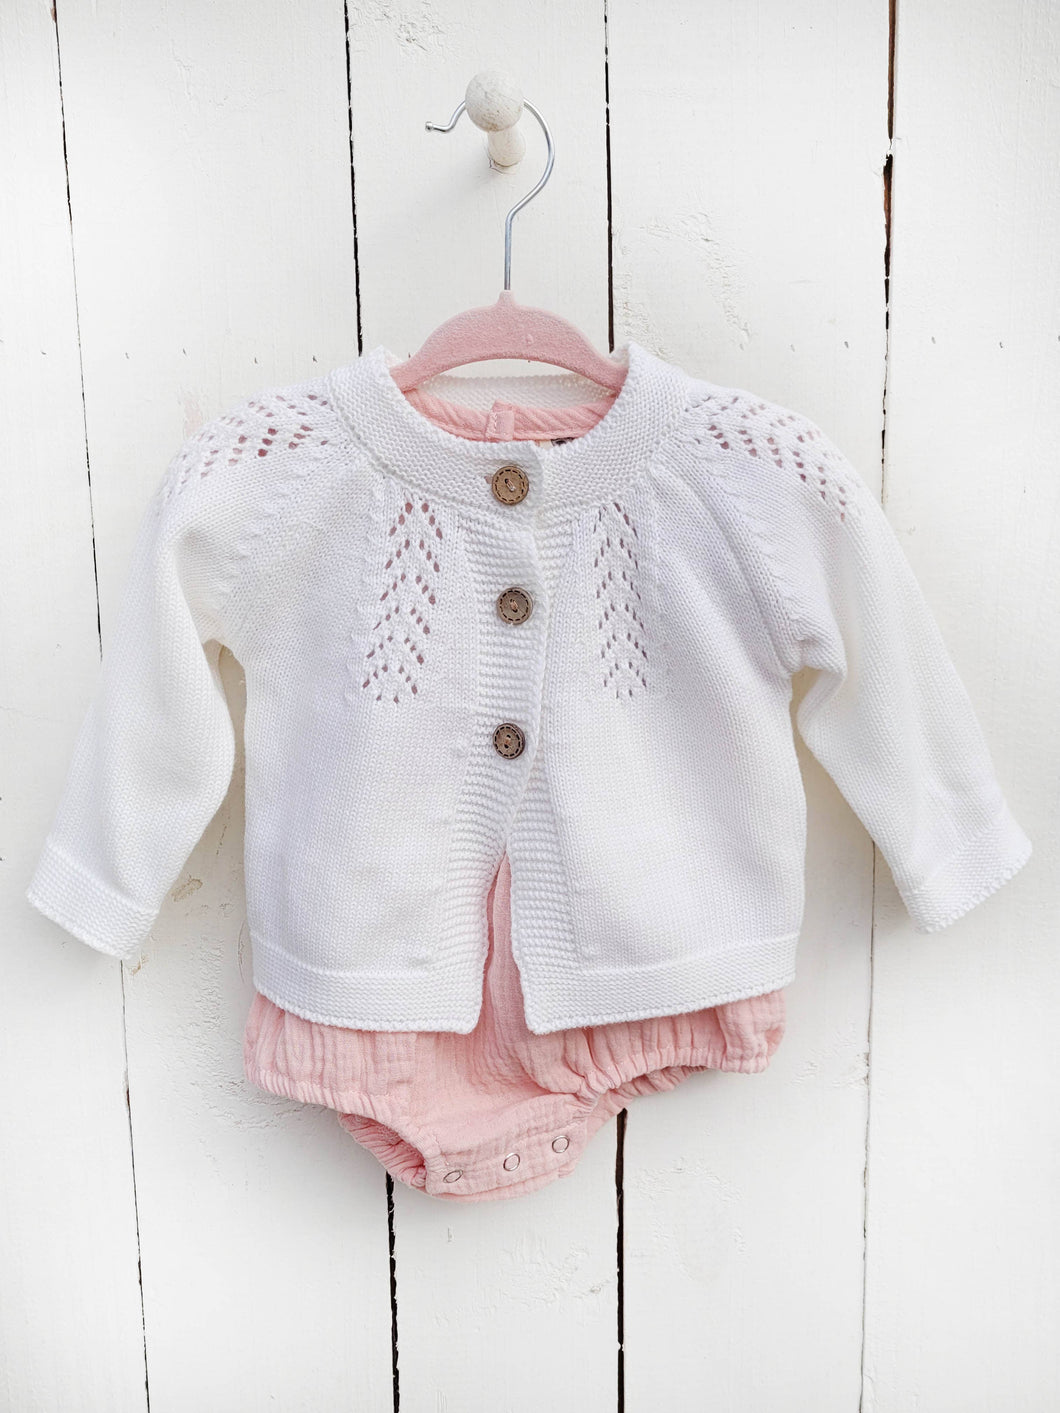 Baby Girl Knit Sweater Cardigan Top buttoned Spring dressy